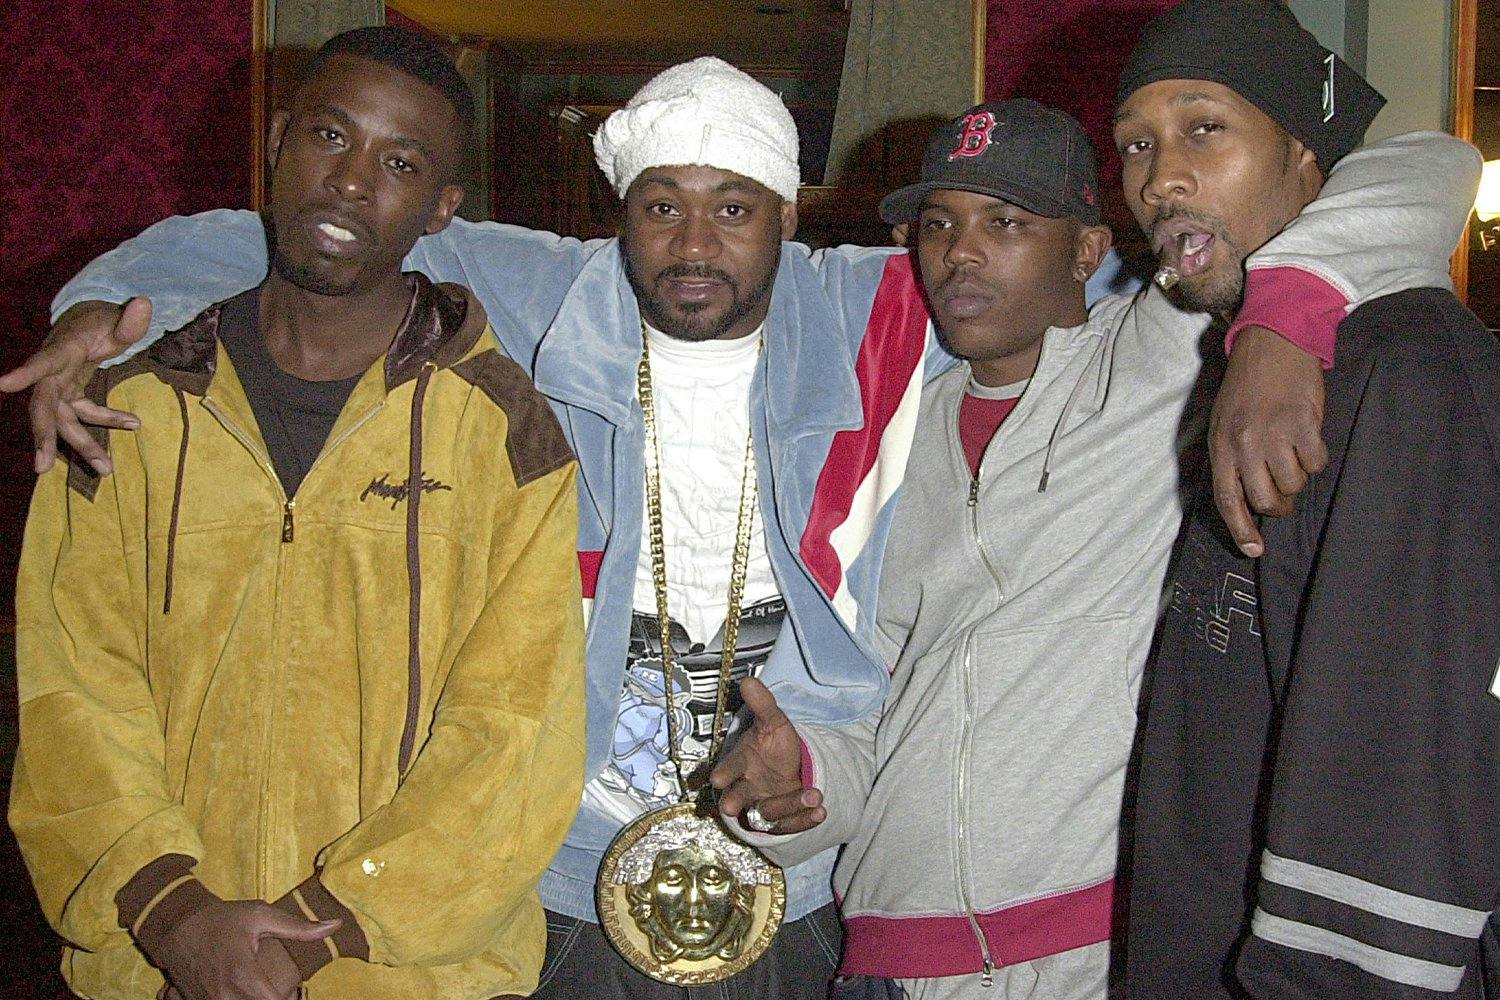 GZA, Ghostface Killah, Power and RZA during GZA and Wu-Tang Clan 2002 Video Shoot at Etoile in New York City, New York, United States. (Photo by Djamilla Rosa Cochran/WireImage)